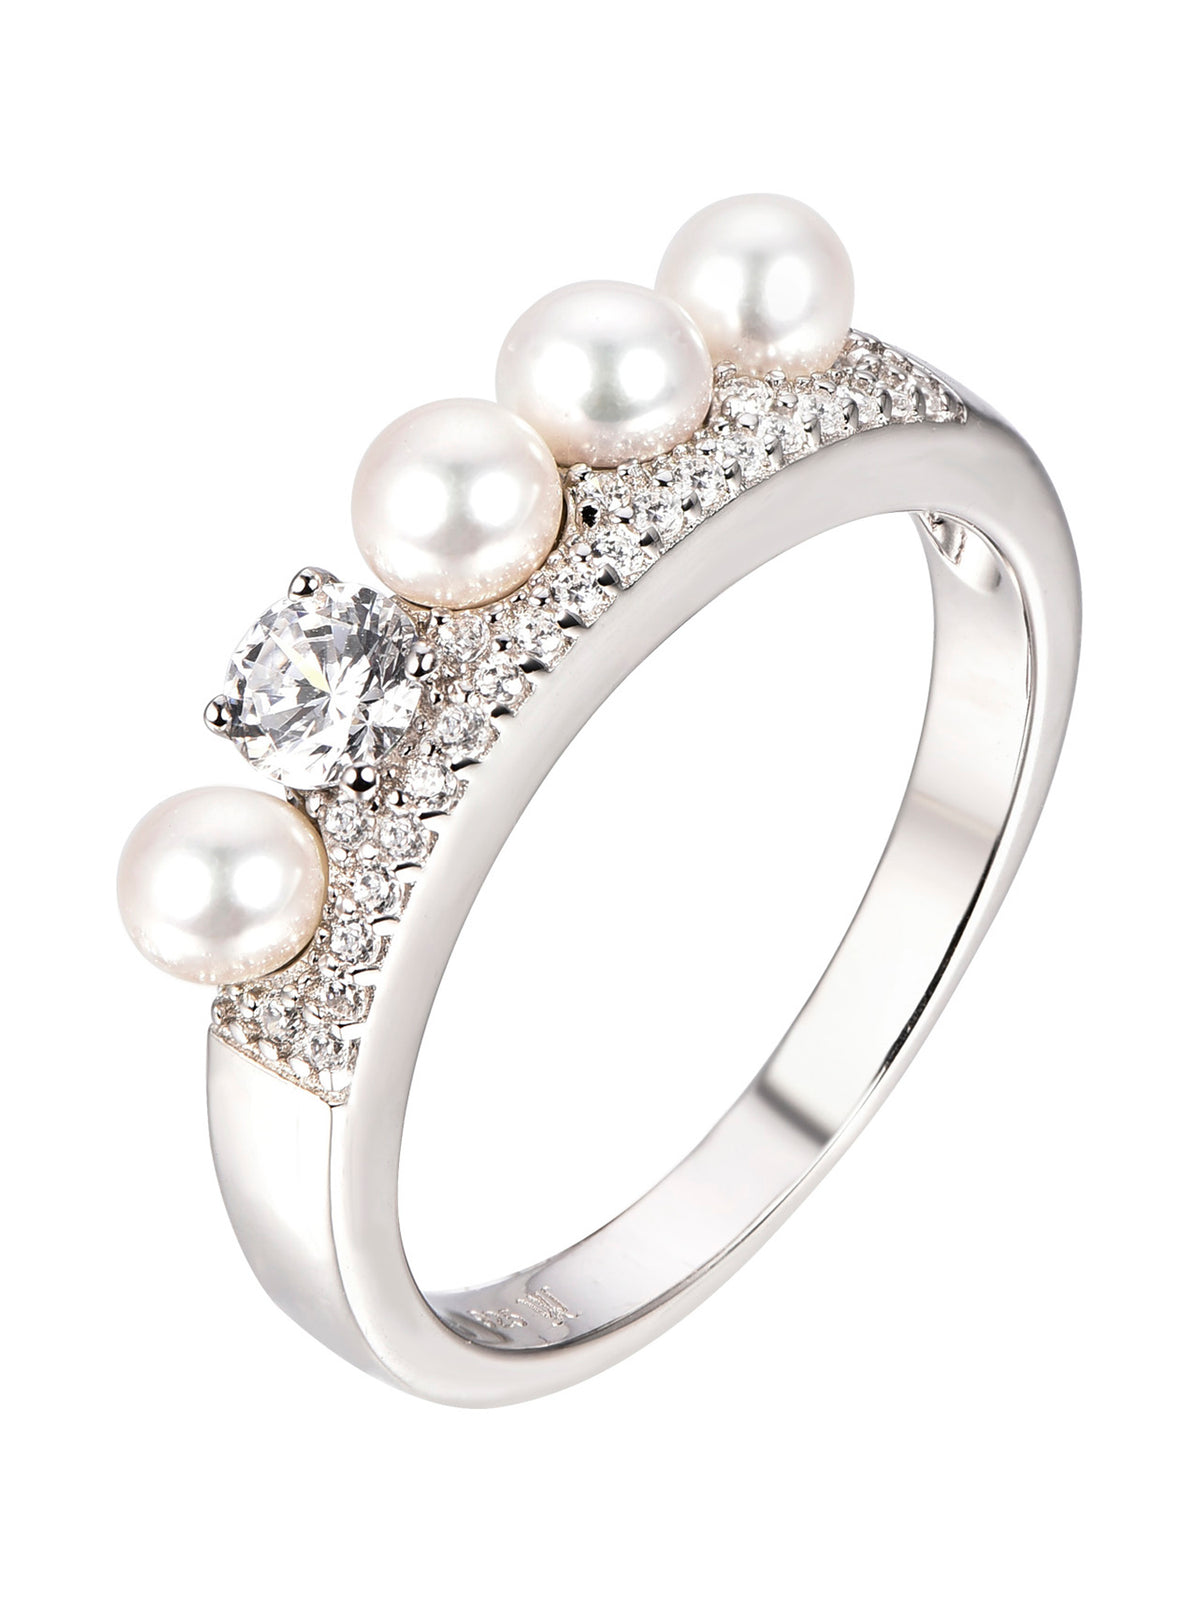 PEARL AND SOLITAIRE BAND RING IN 925 STERLING SILVER